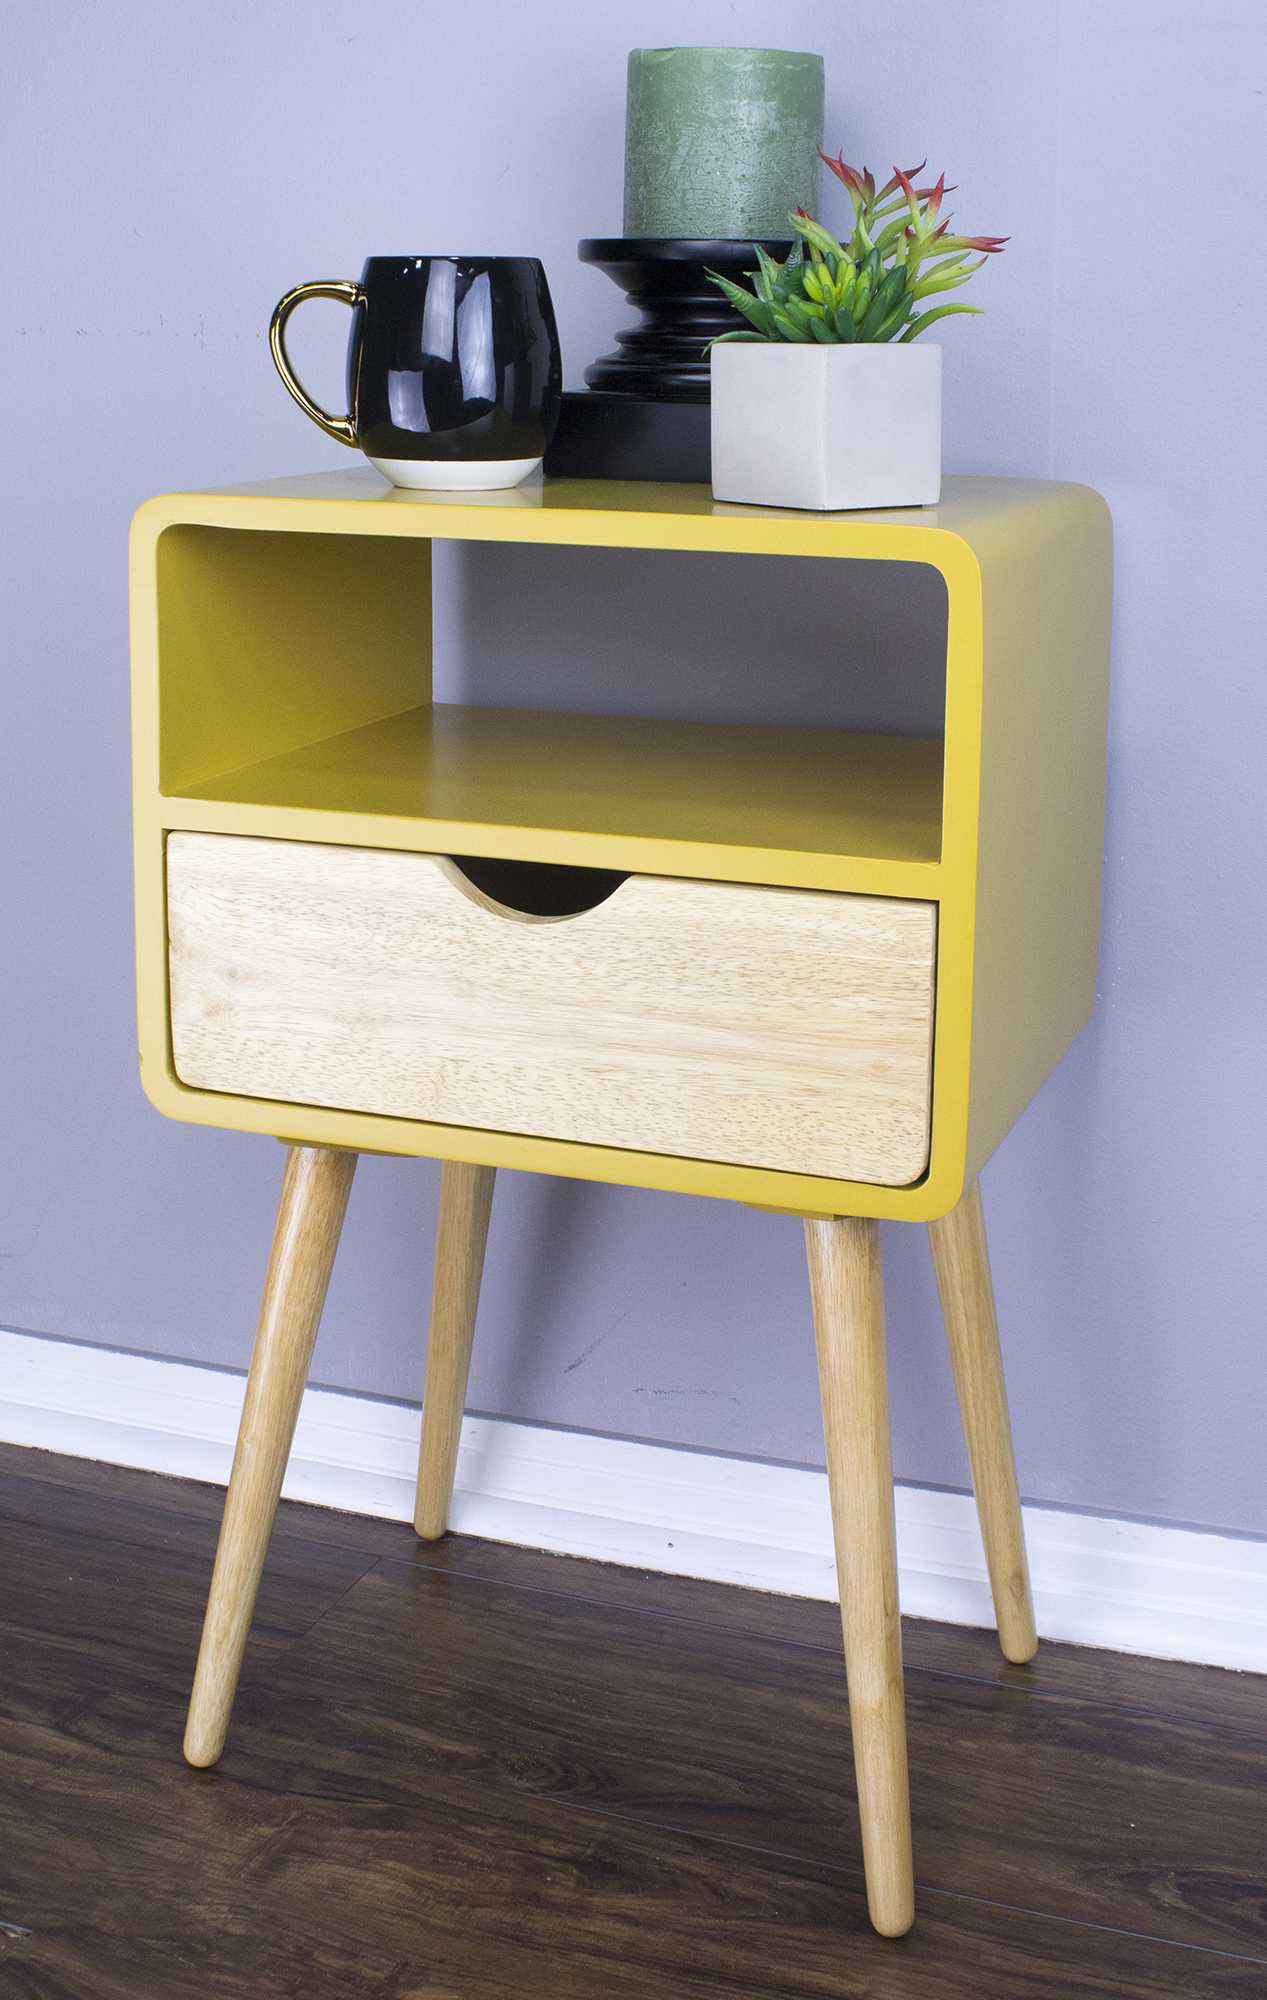 16" X 12" X 26" Yellow MDF Wood End Table with Drawer and Shelf